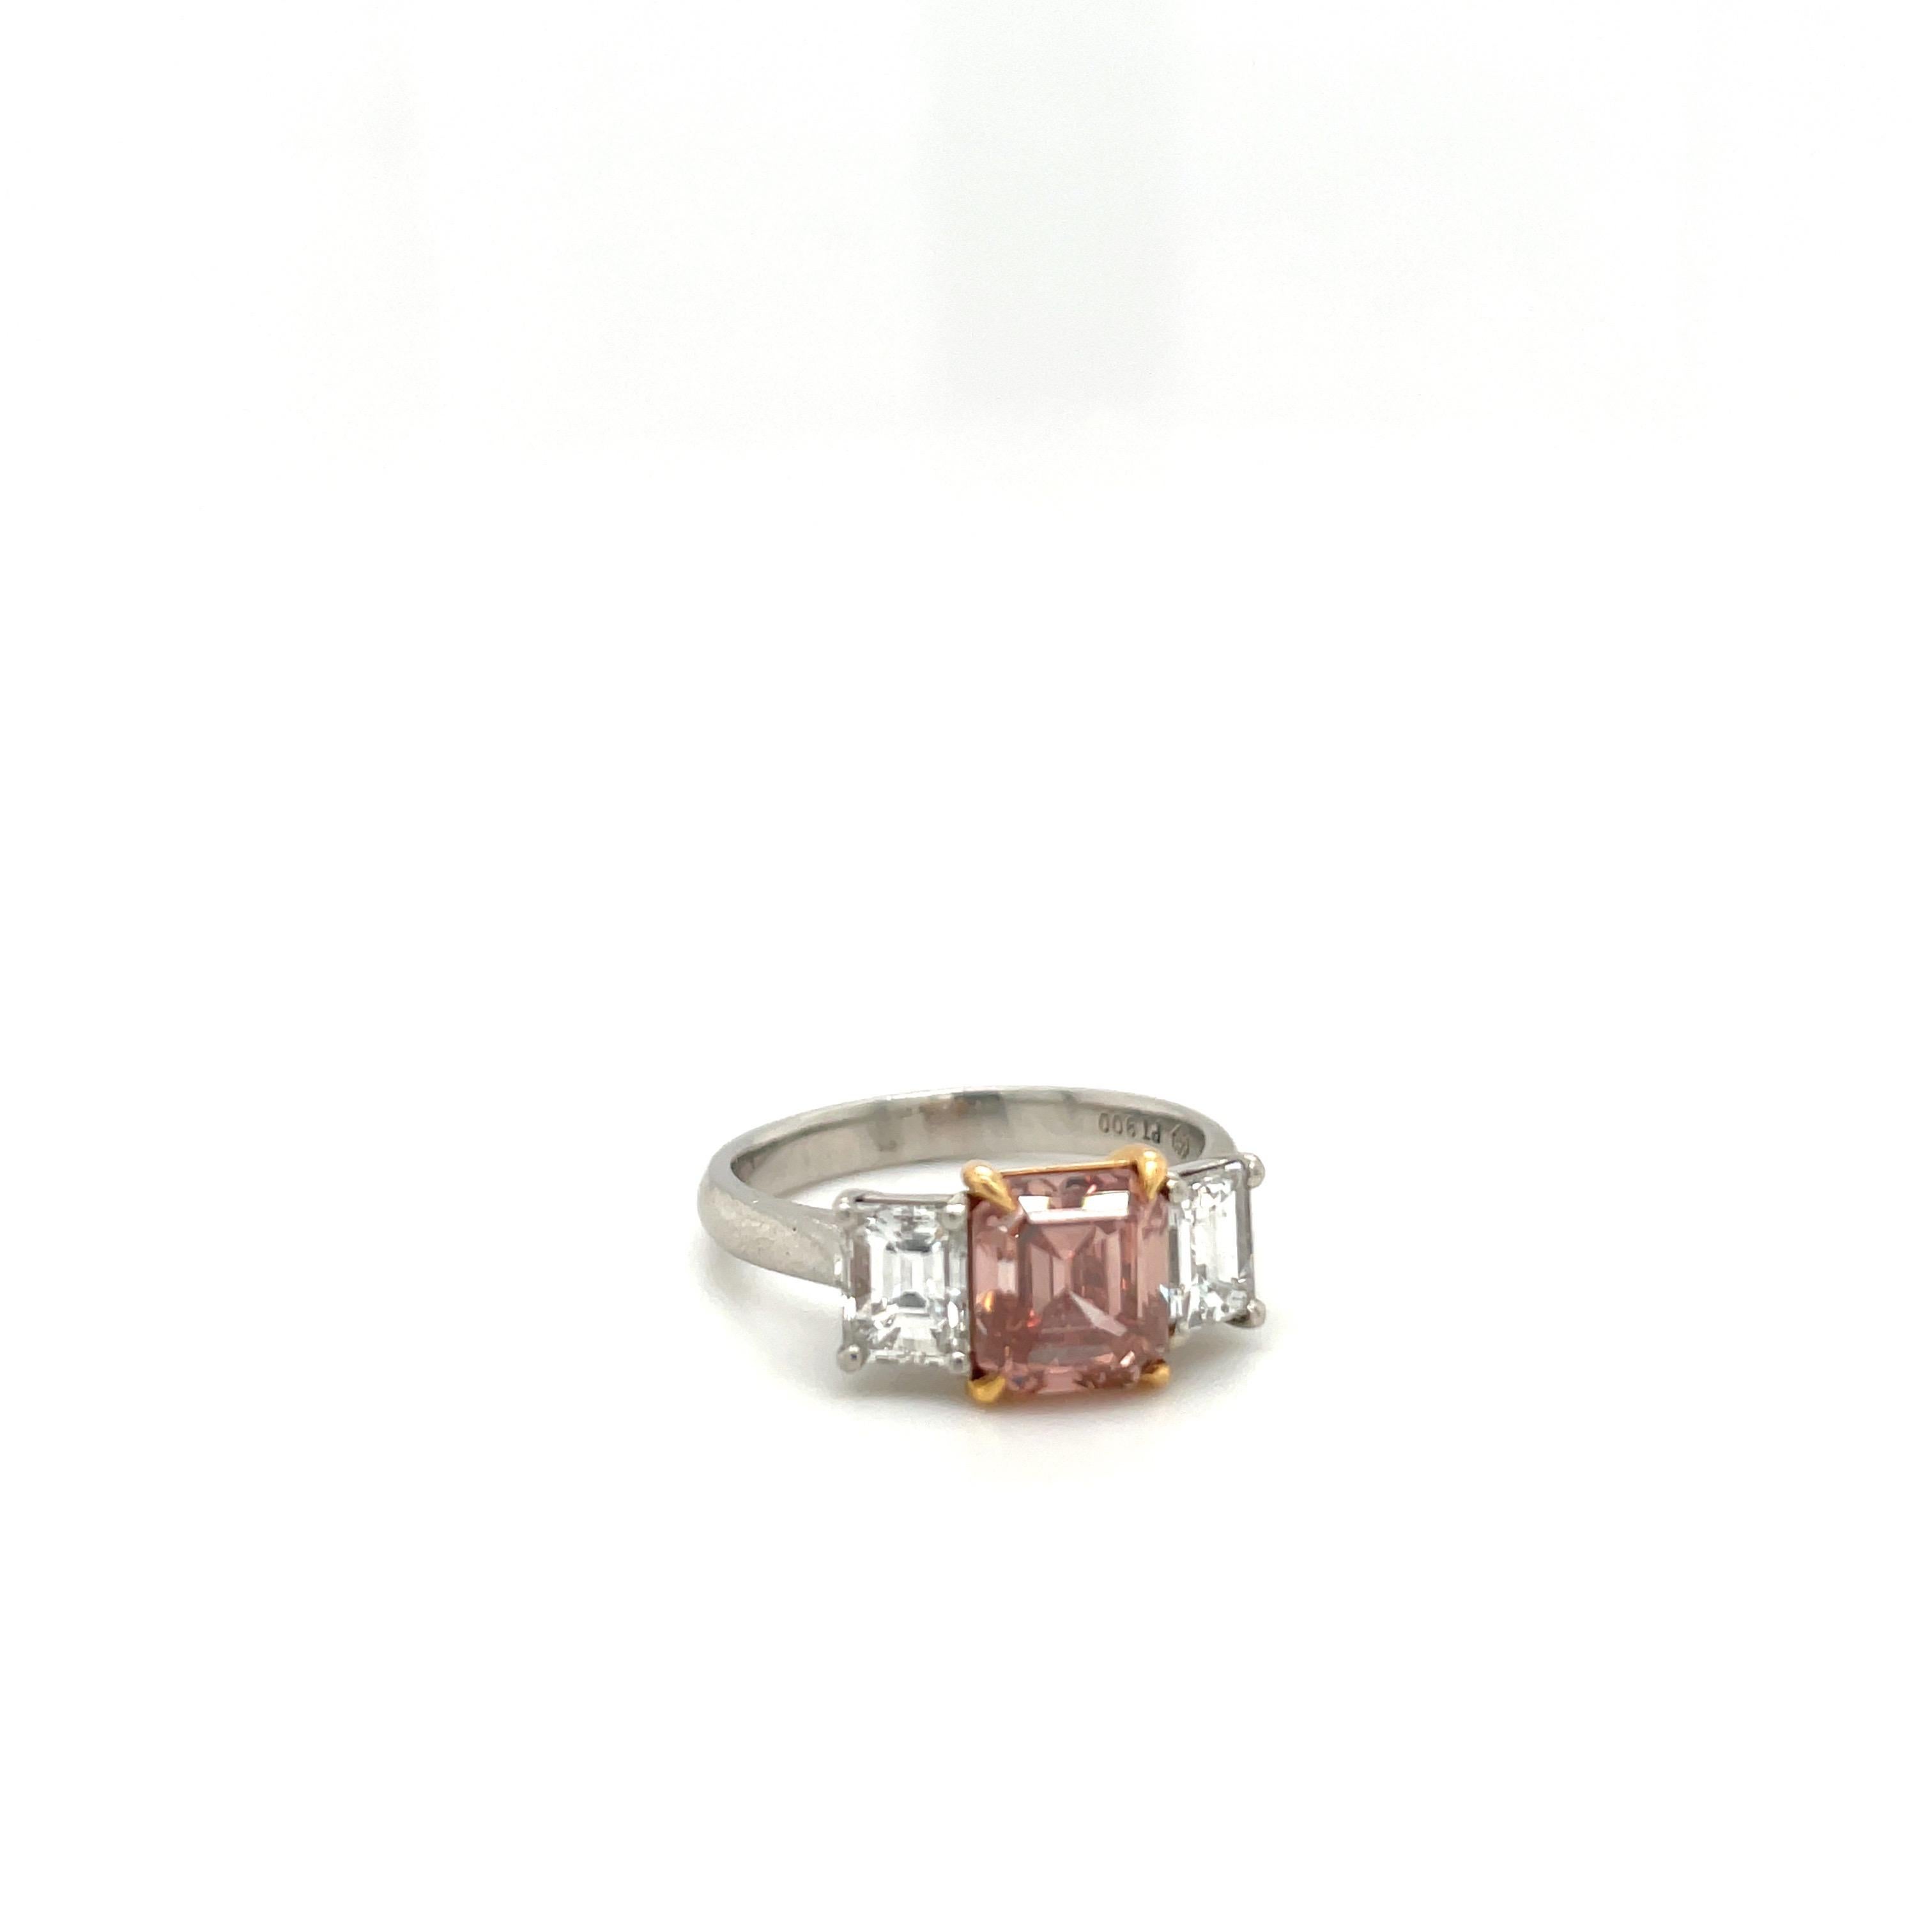 1.75ct GIA Natural Fancy Pink Emerald Cut Diamond Ring For Sale 1